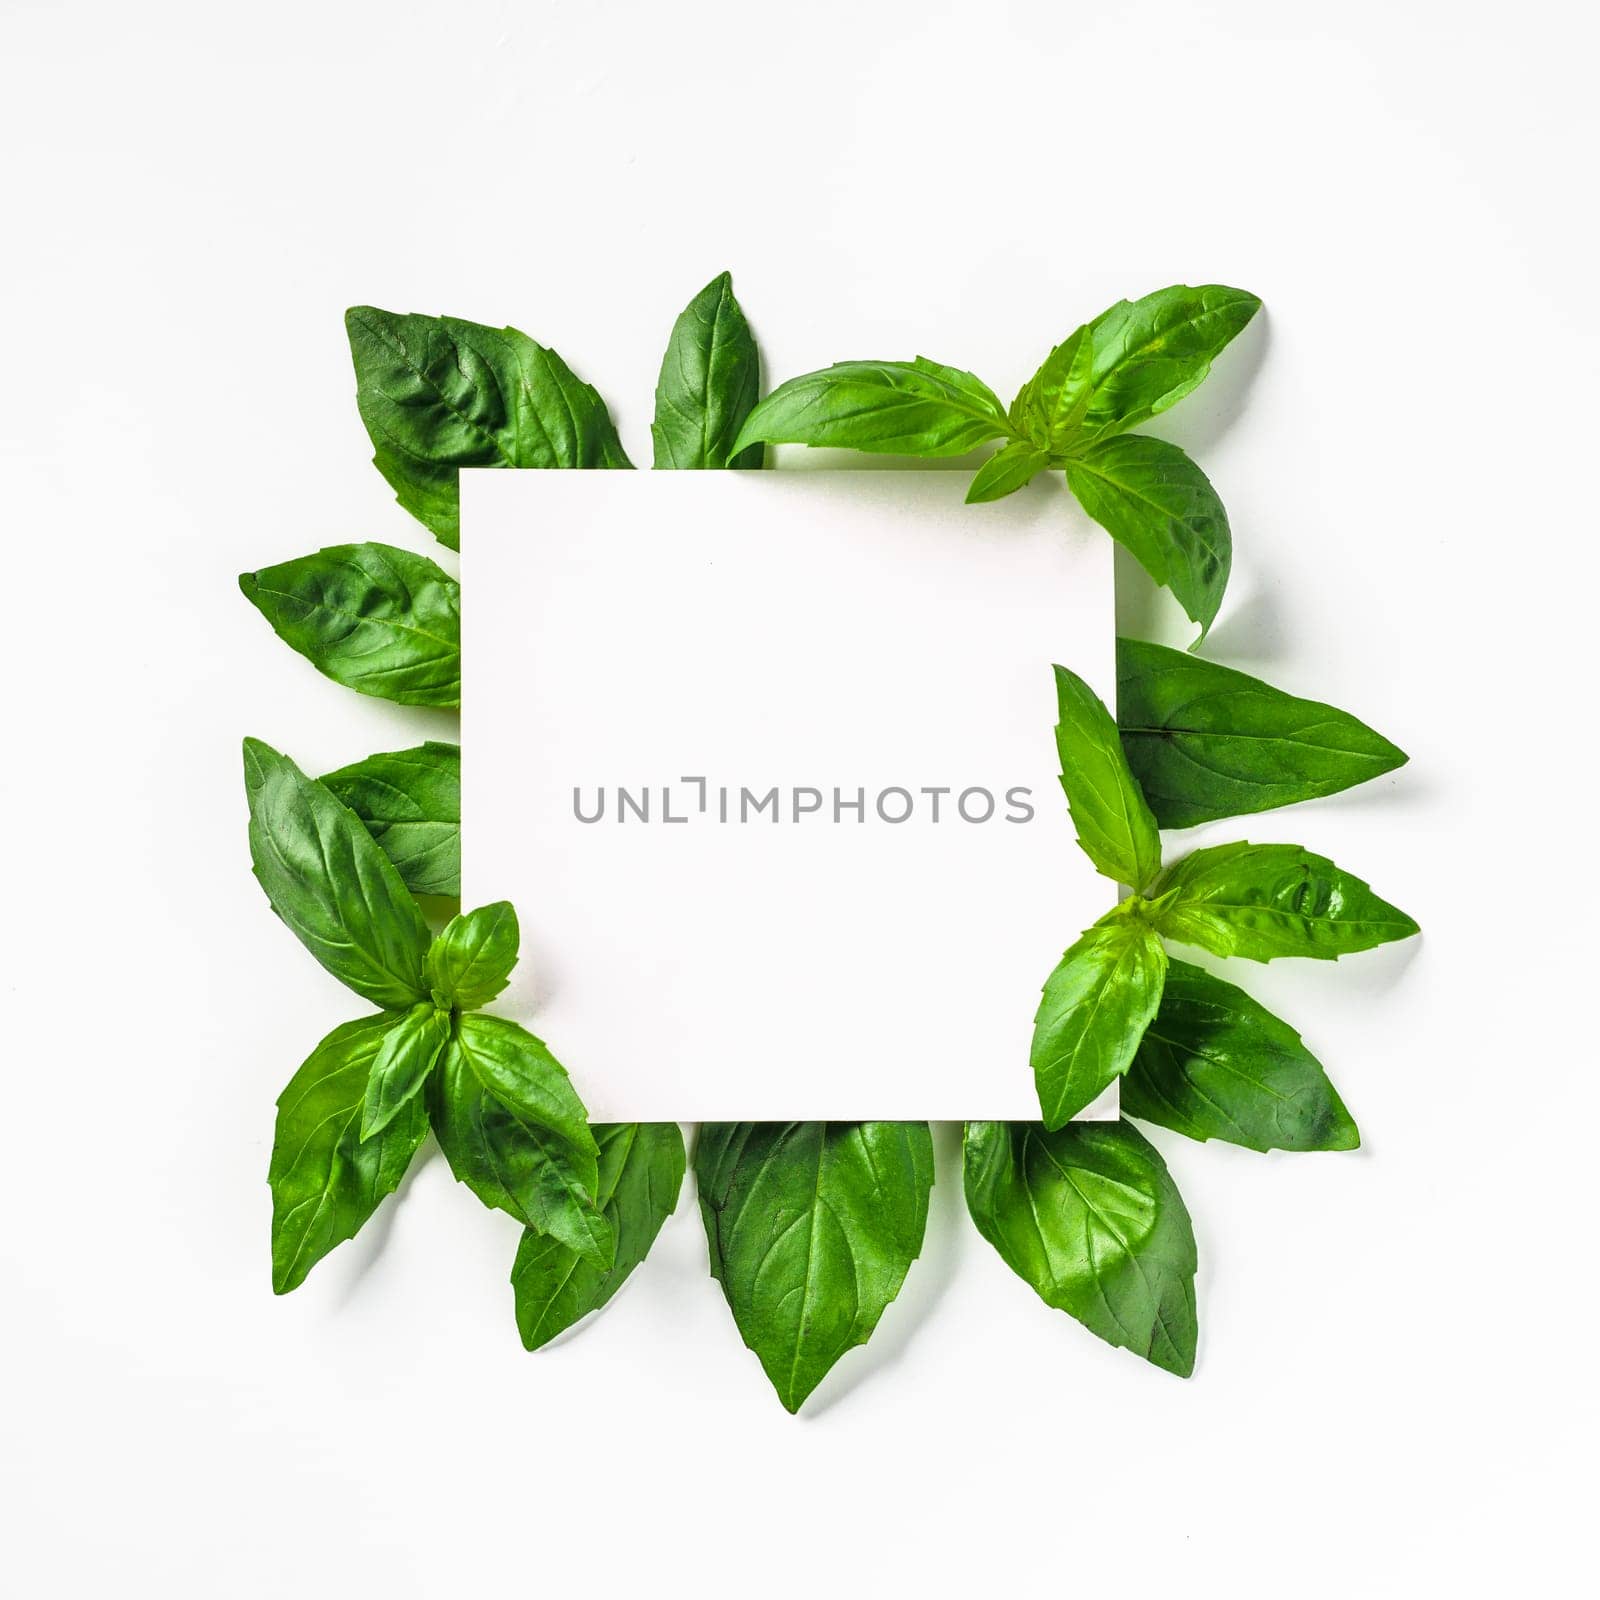 White paper square on green basil leaves by fascinadora